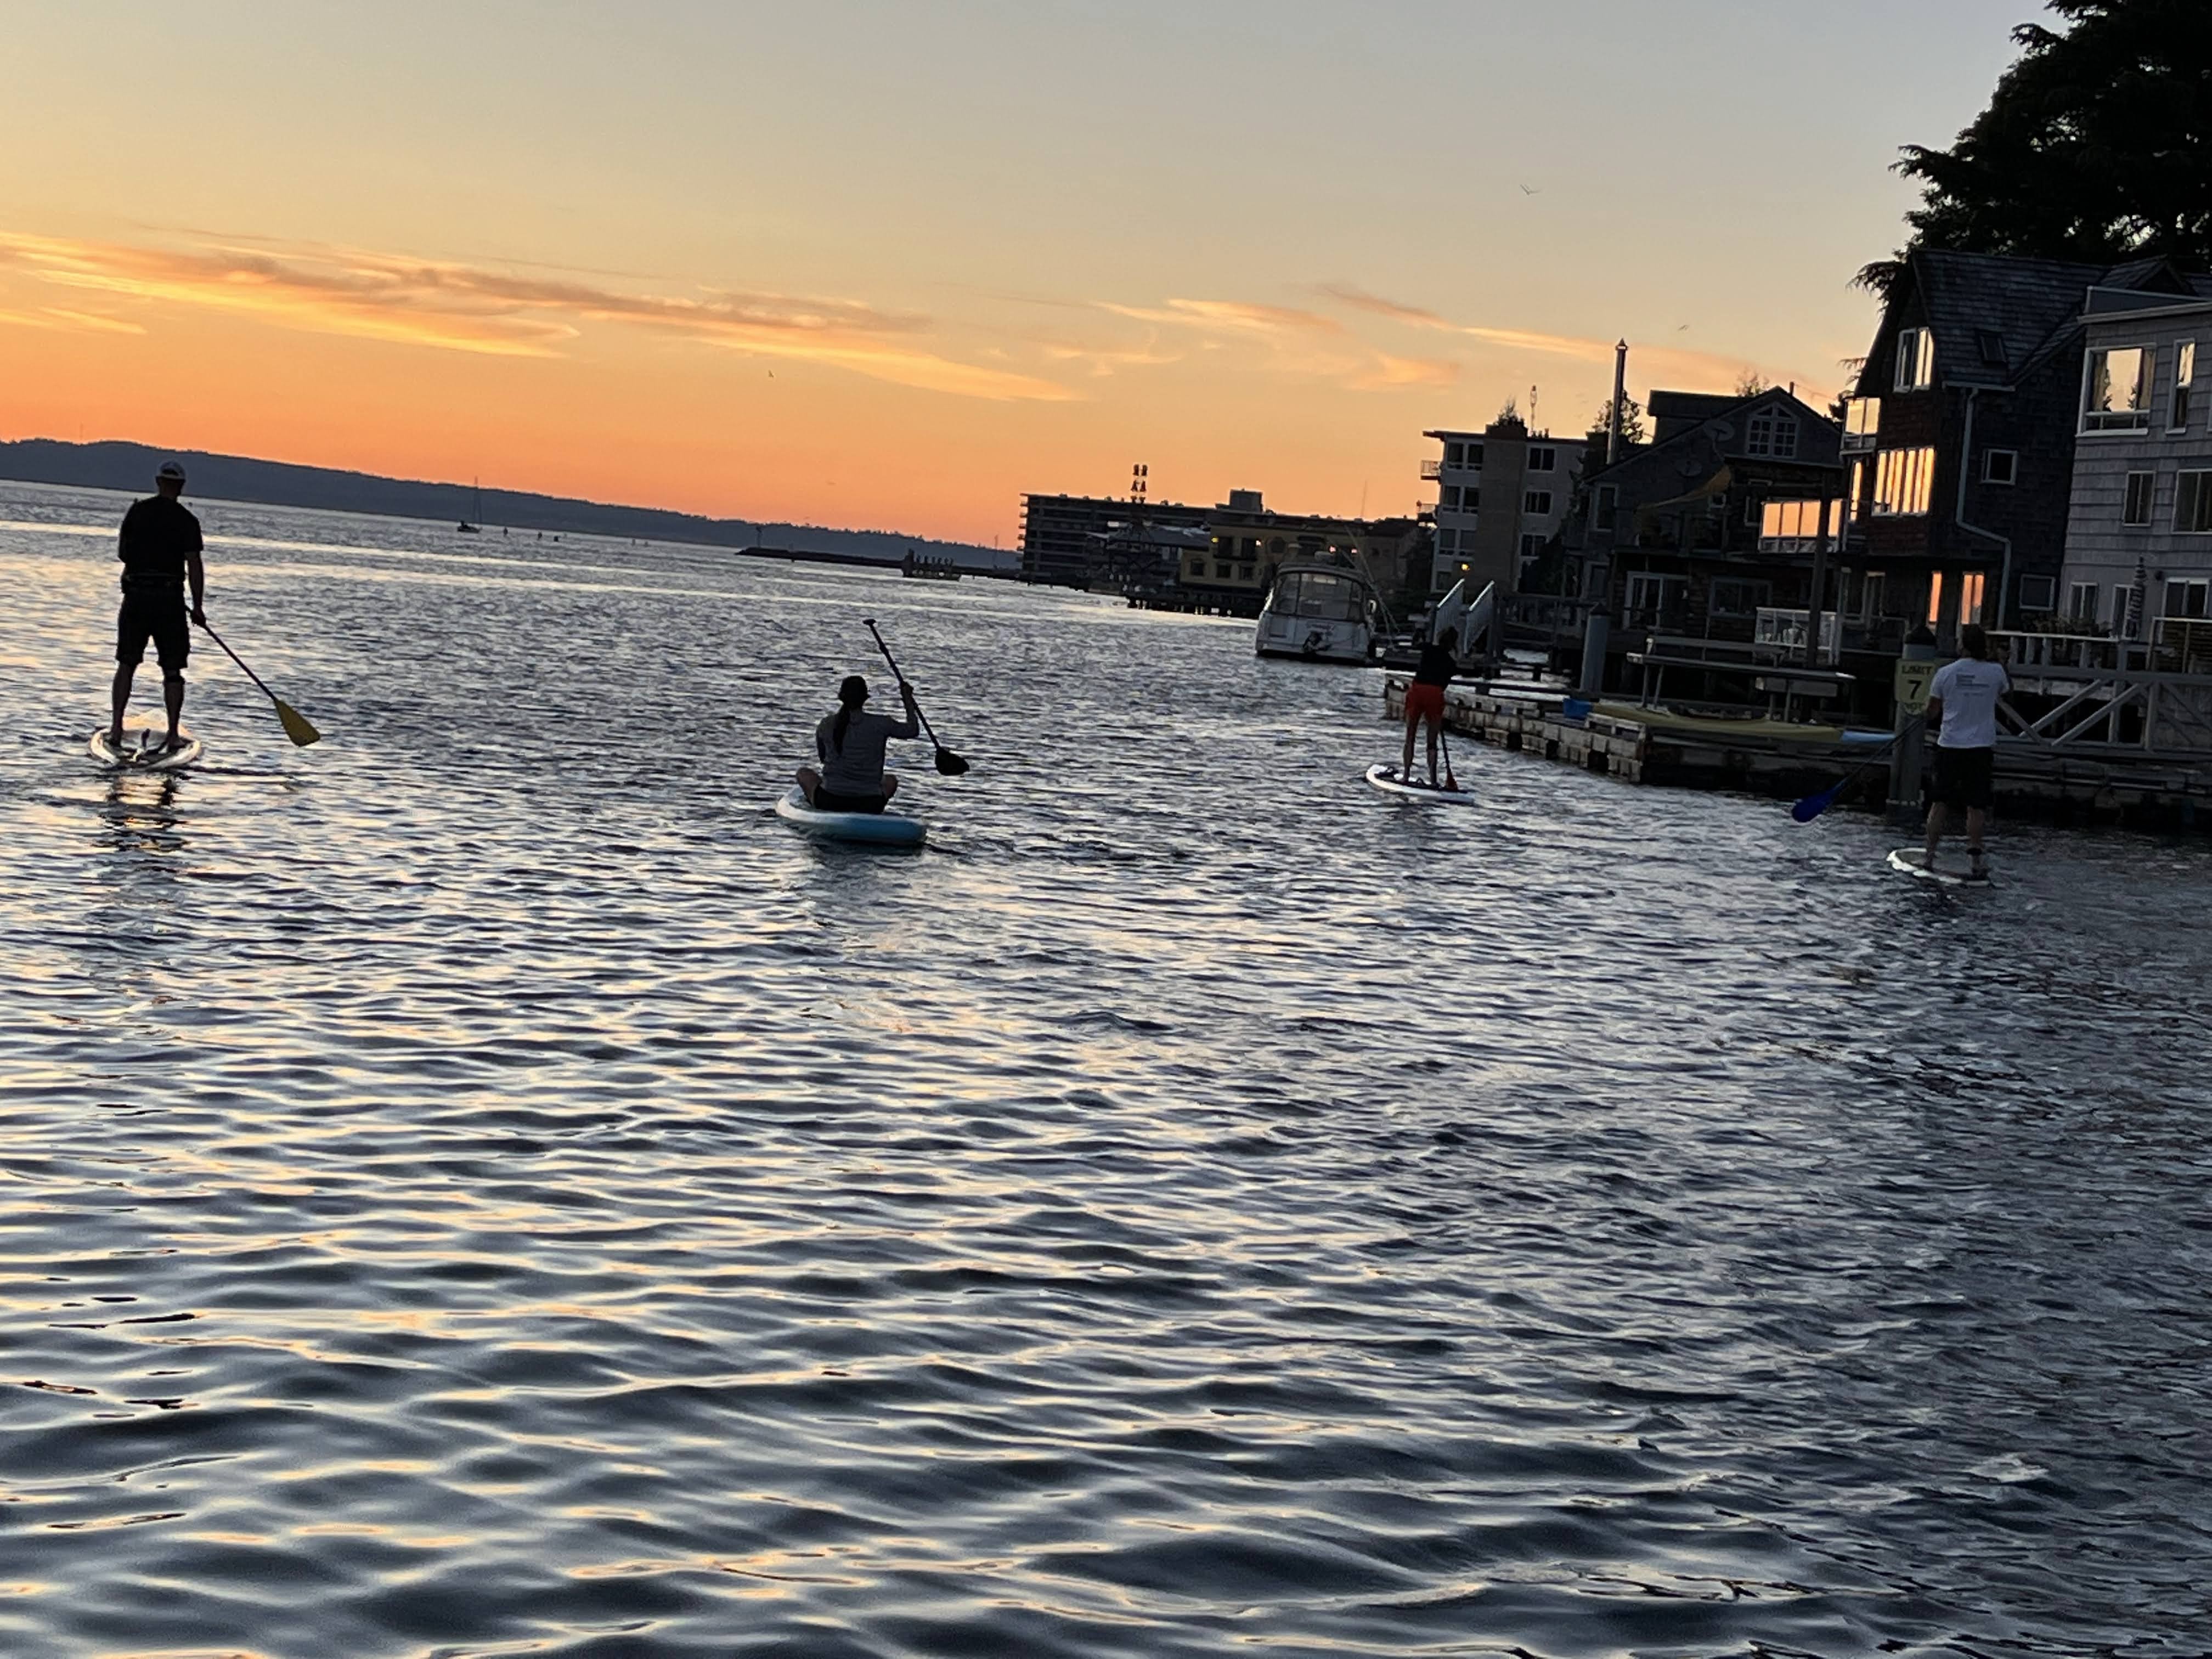 Paddle boarders paddling in Puget Sound at sunset.